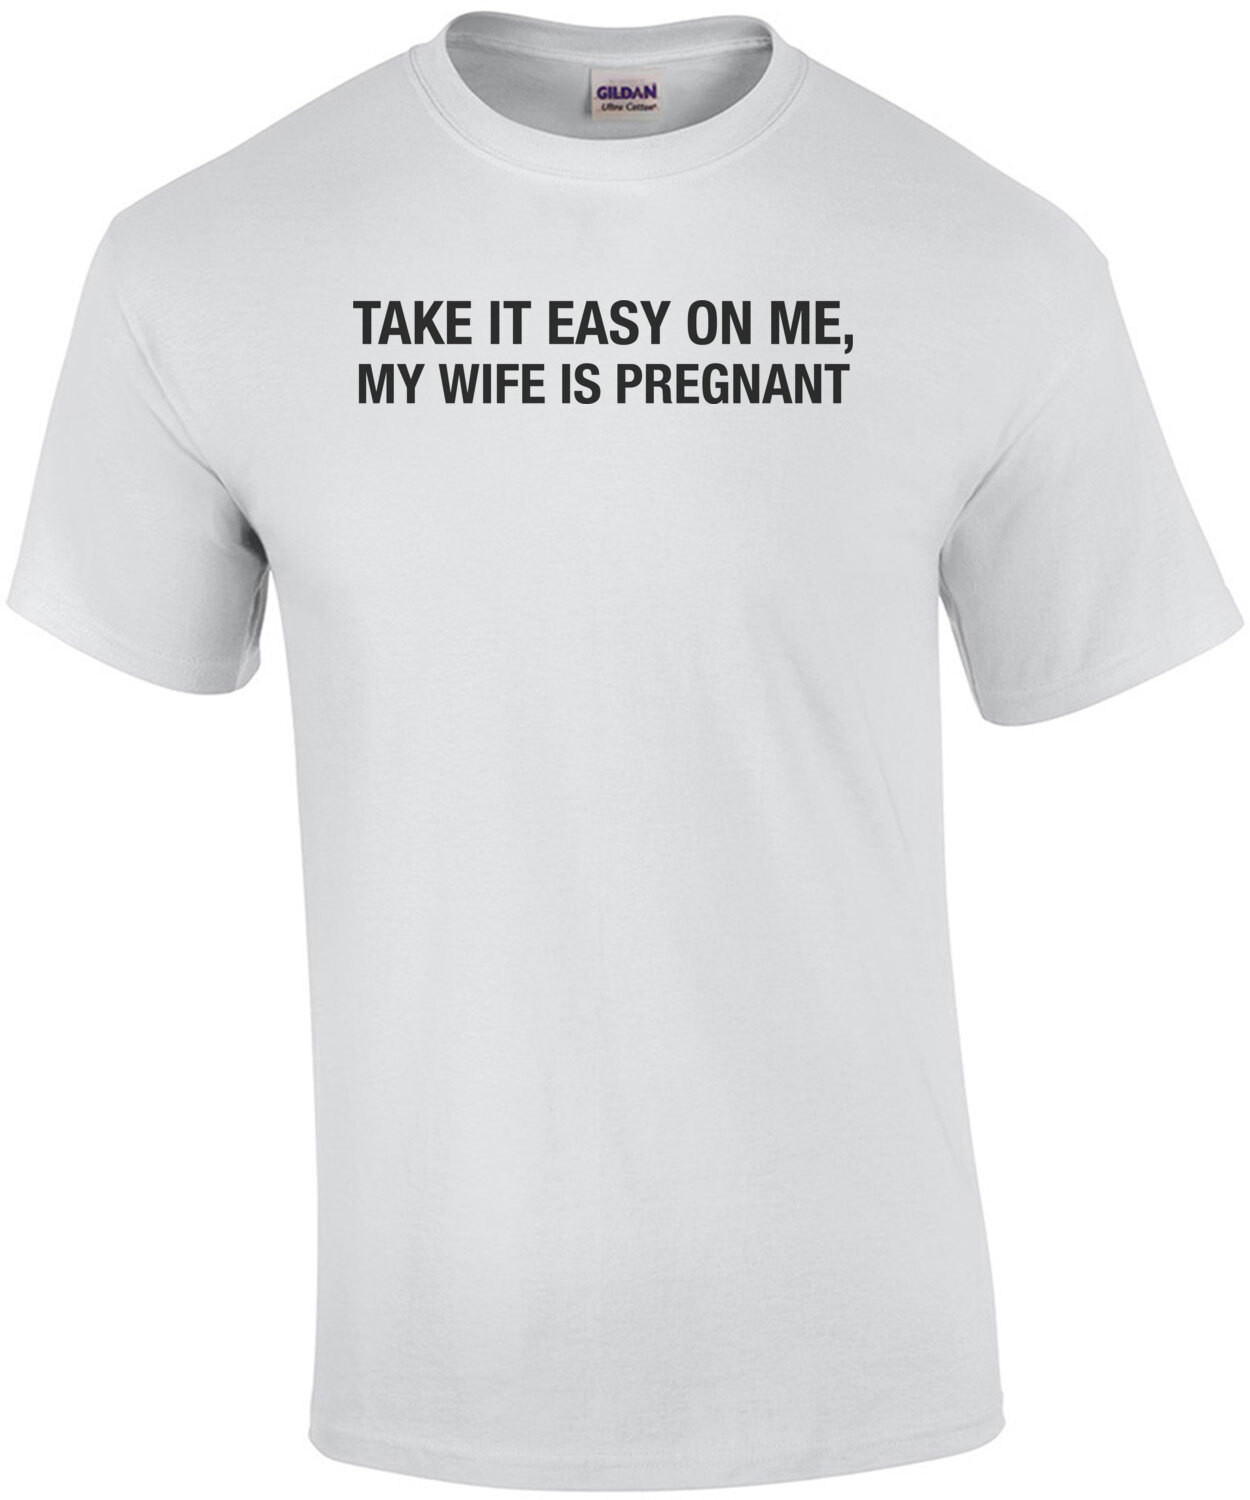 Take it Easy on Me My Wife is Pregnant Shirt